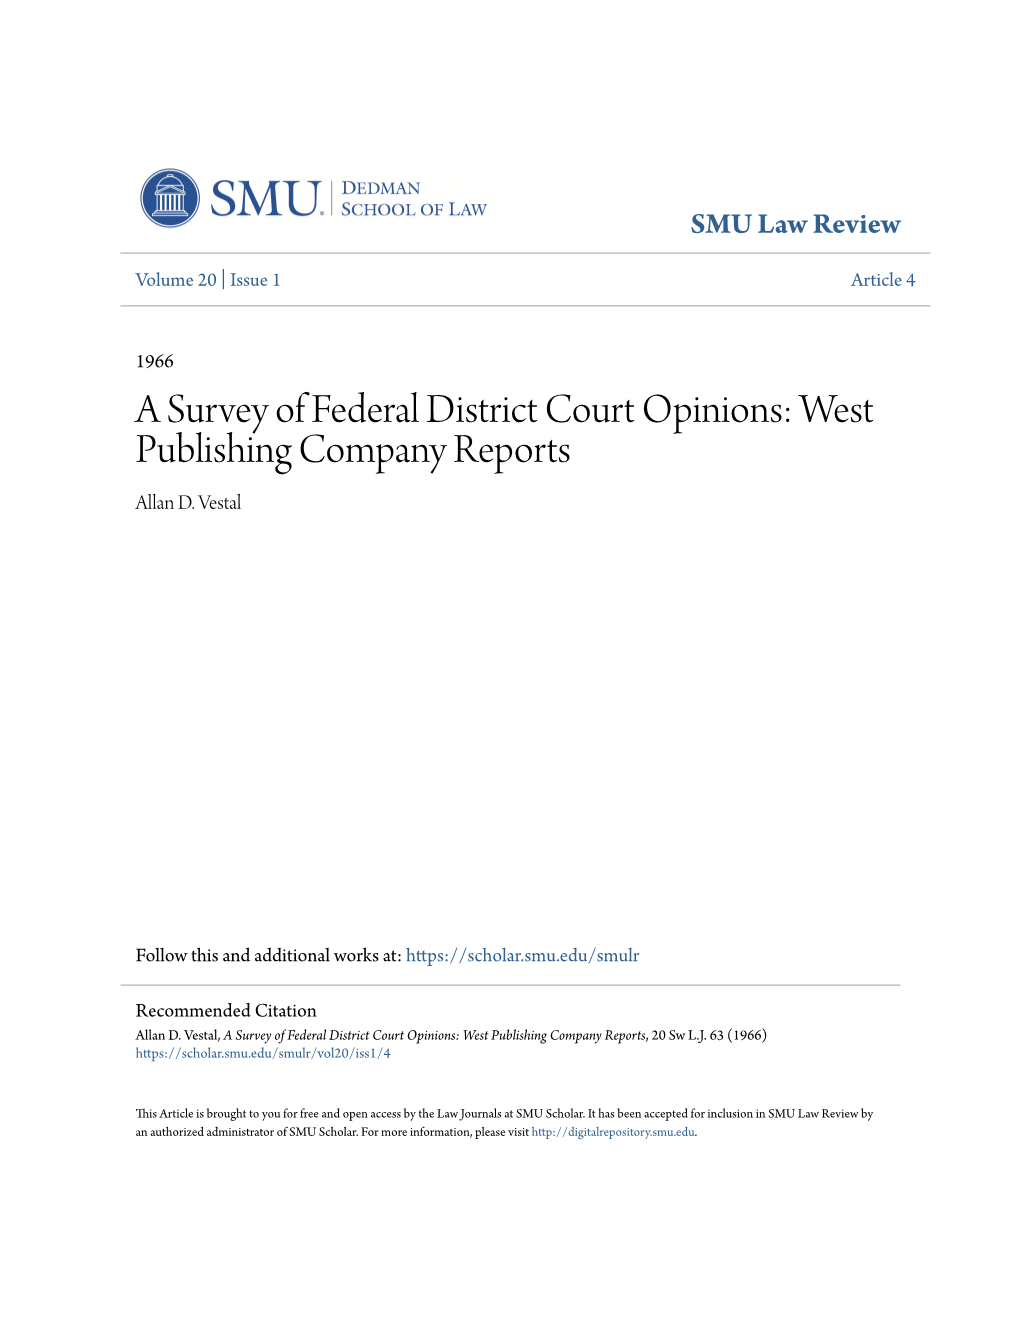 A Survey of Federal District Court Opinions: West Publishing Company Reports Allan D